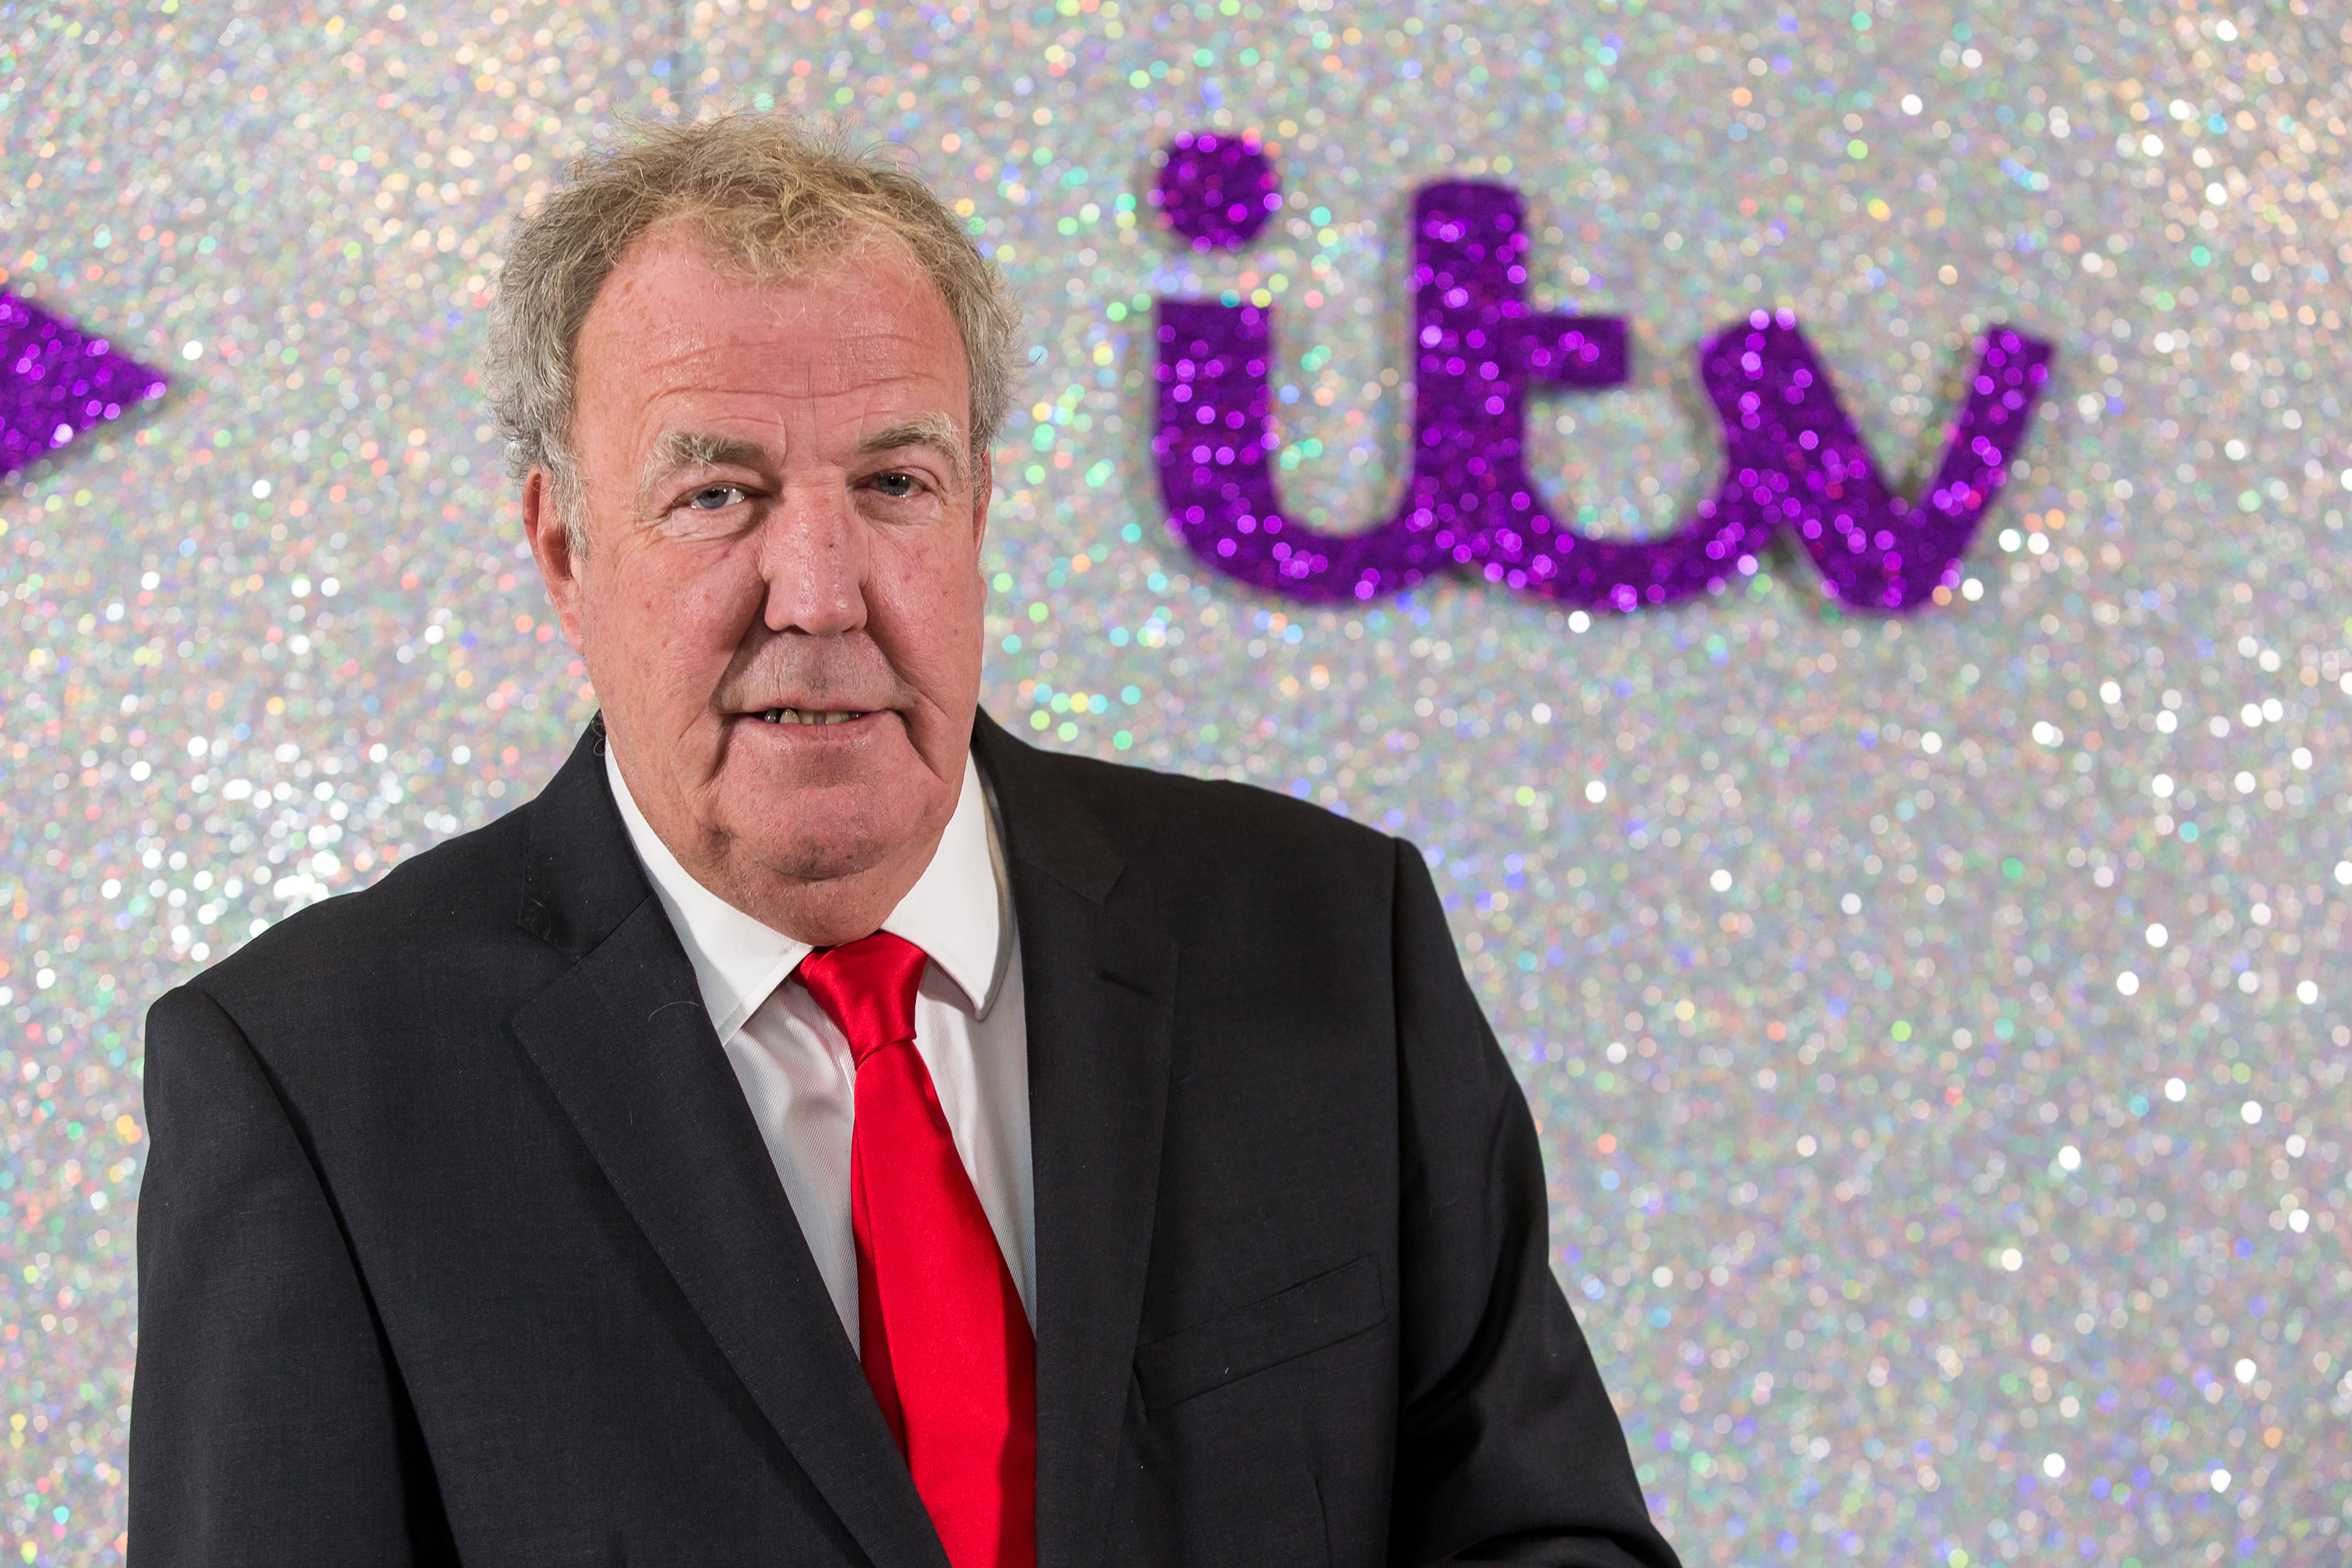 Clarkson was a controversial figure during his time on the show